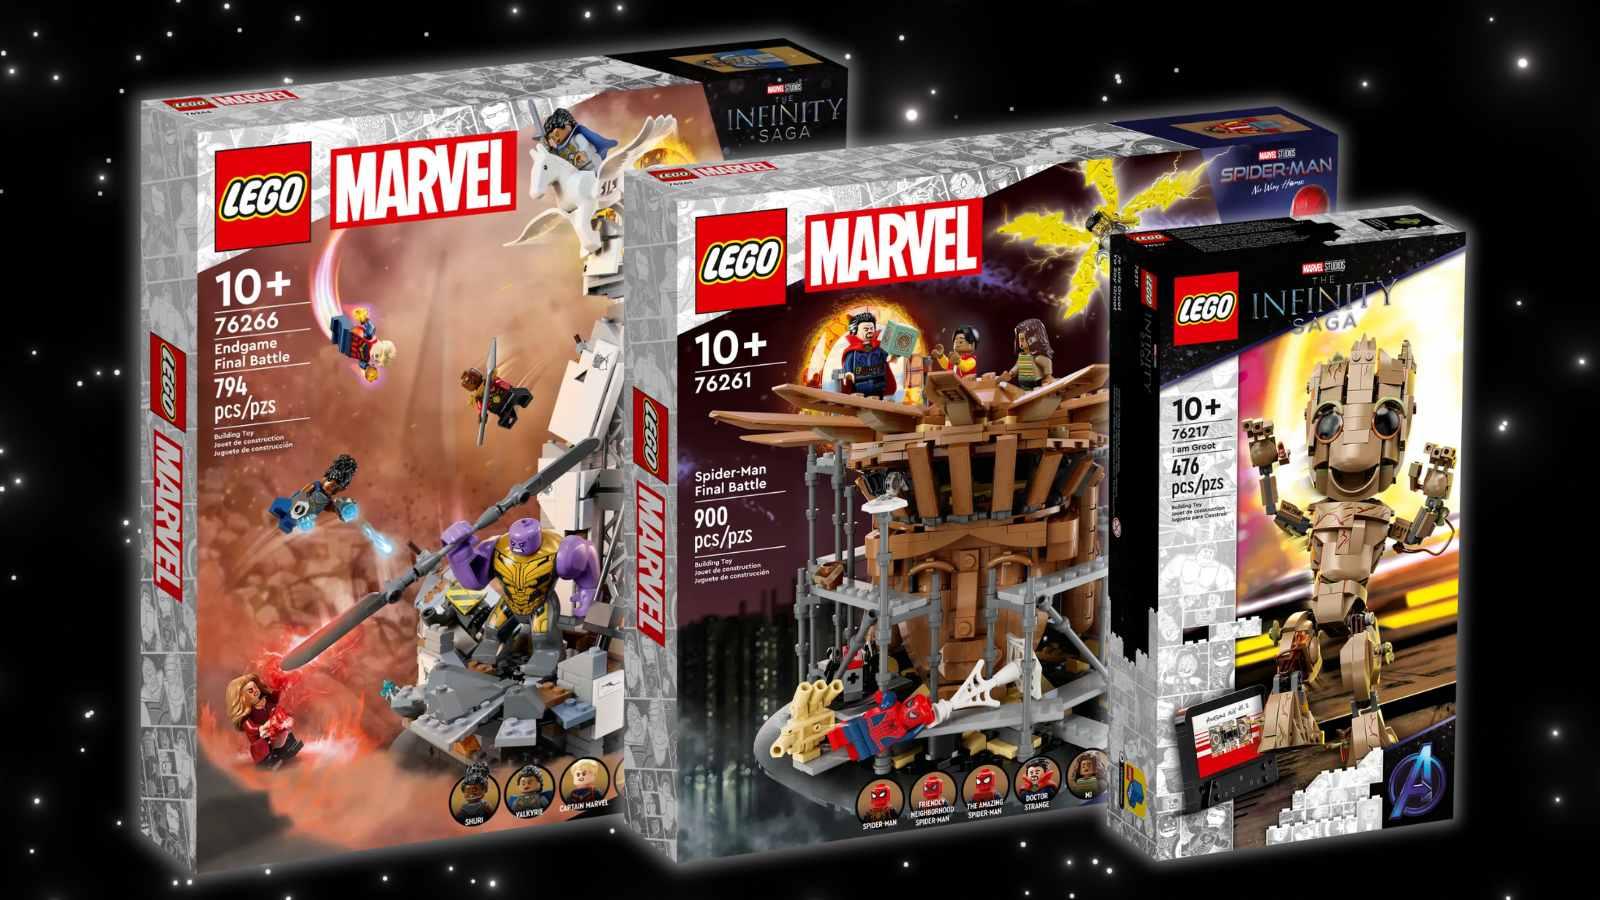 Three of the LEGO Marvel sets discounted at Walmart on a galaxy background.